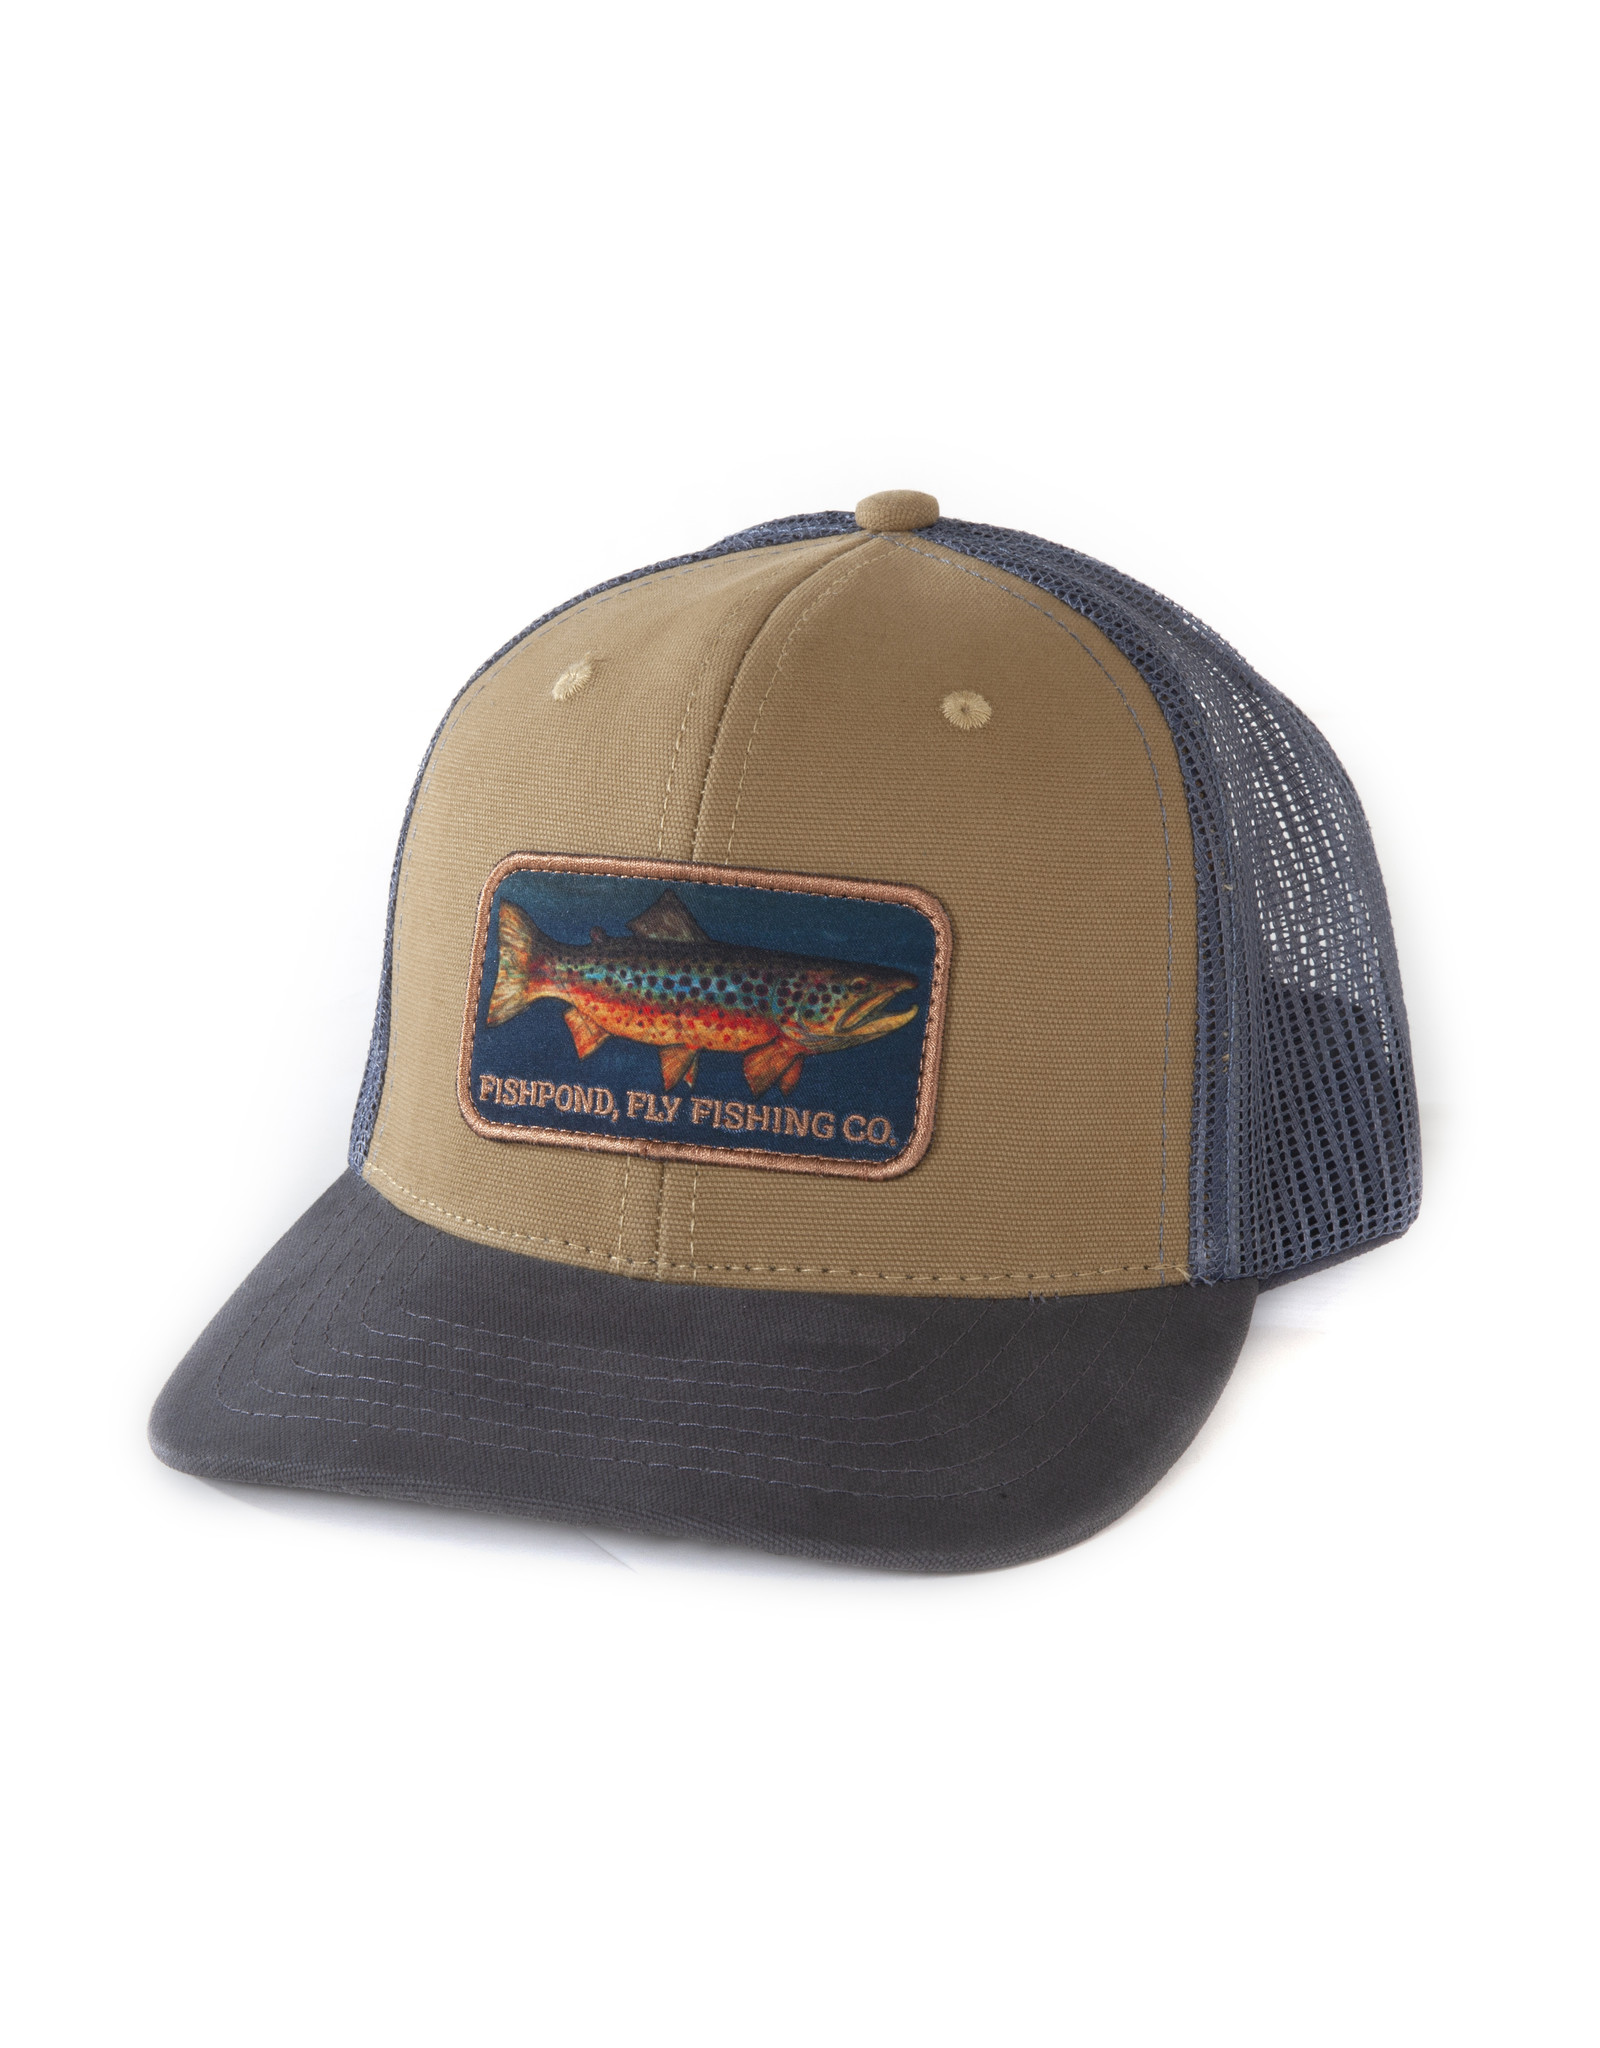 Fishpond LOCAL HAT - WHEAT/CHARCOAL